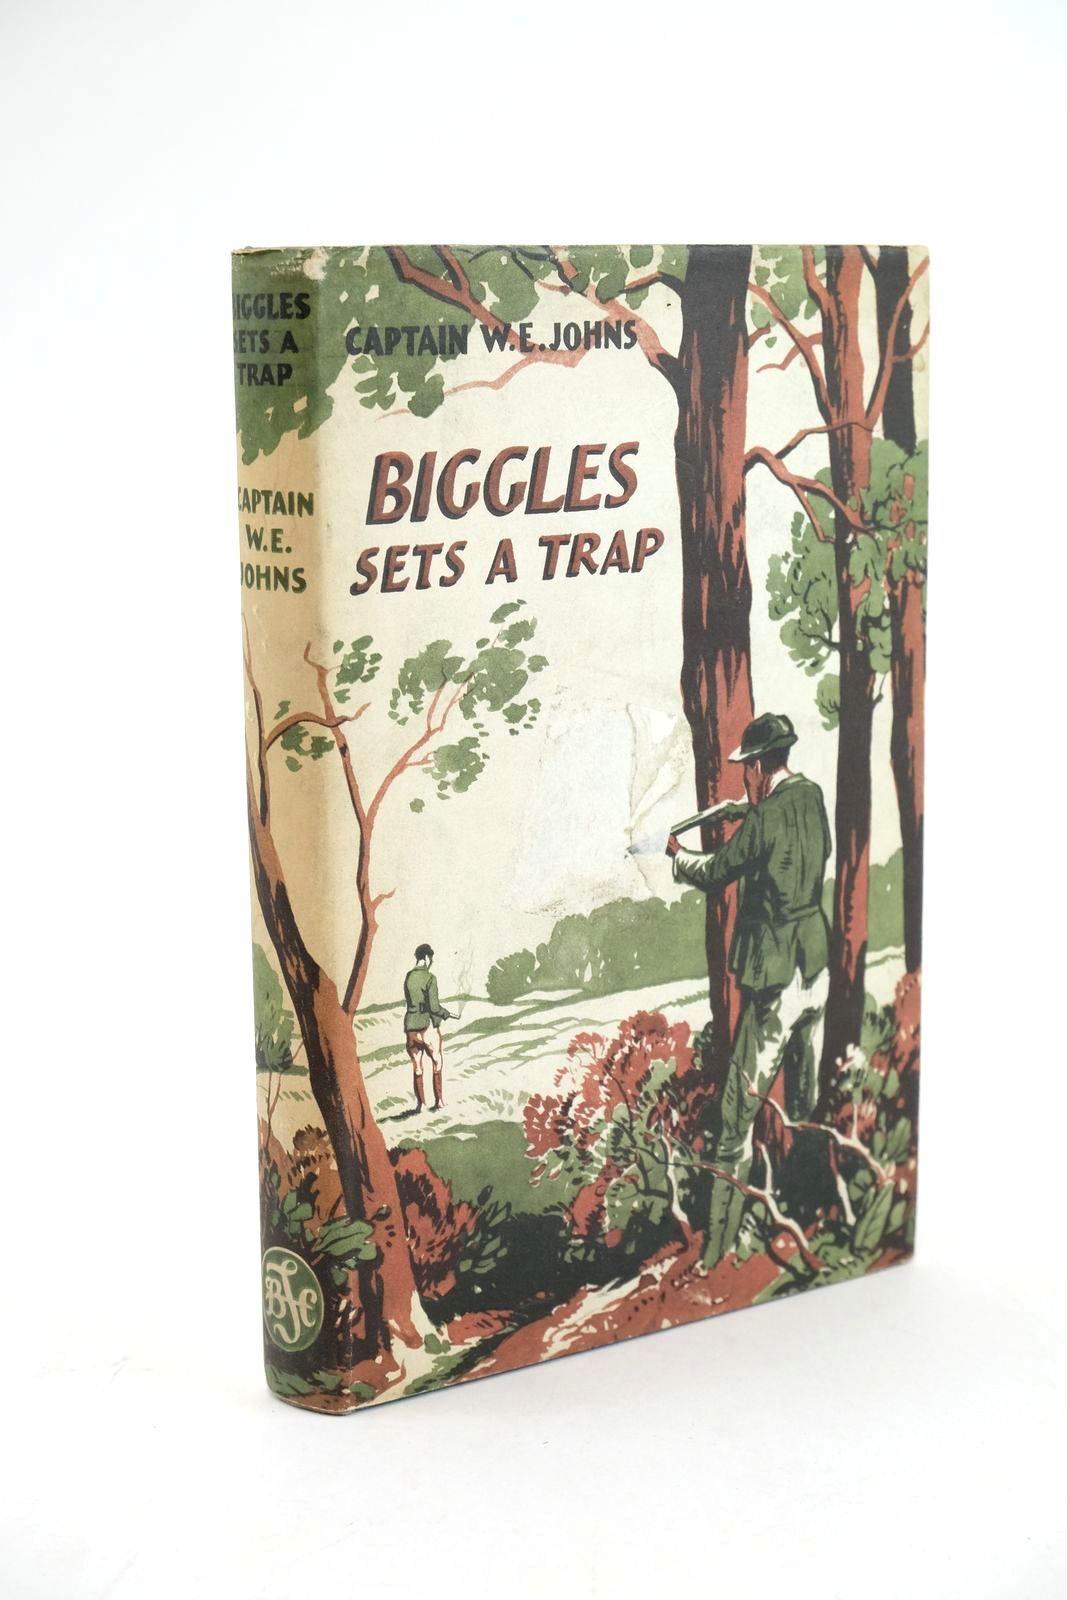 Photo of BIGGLES SETS A TRAP written by Johns, W.E. illustrated by Stead,  published by The Children's Book Club (STOCK CODE: 1323851)  for sale by Stella & Rose's Books